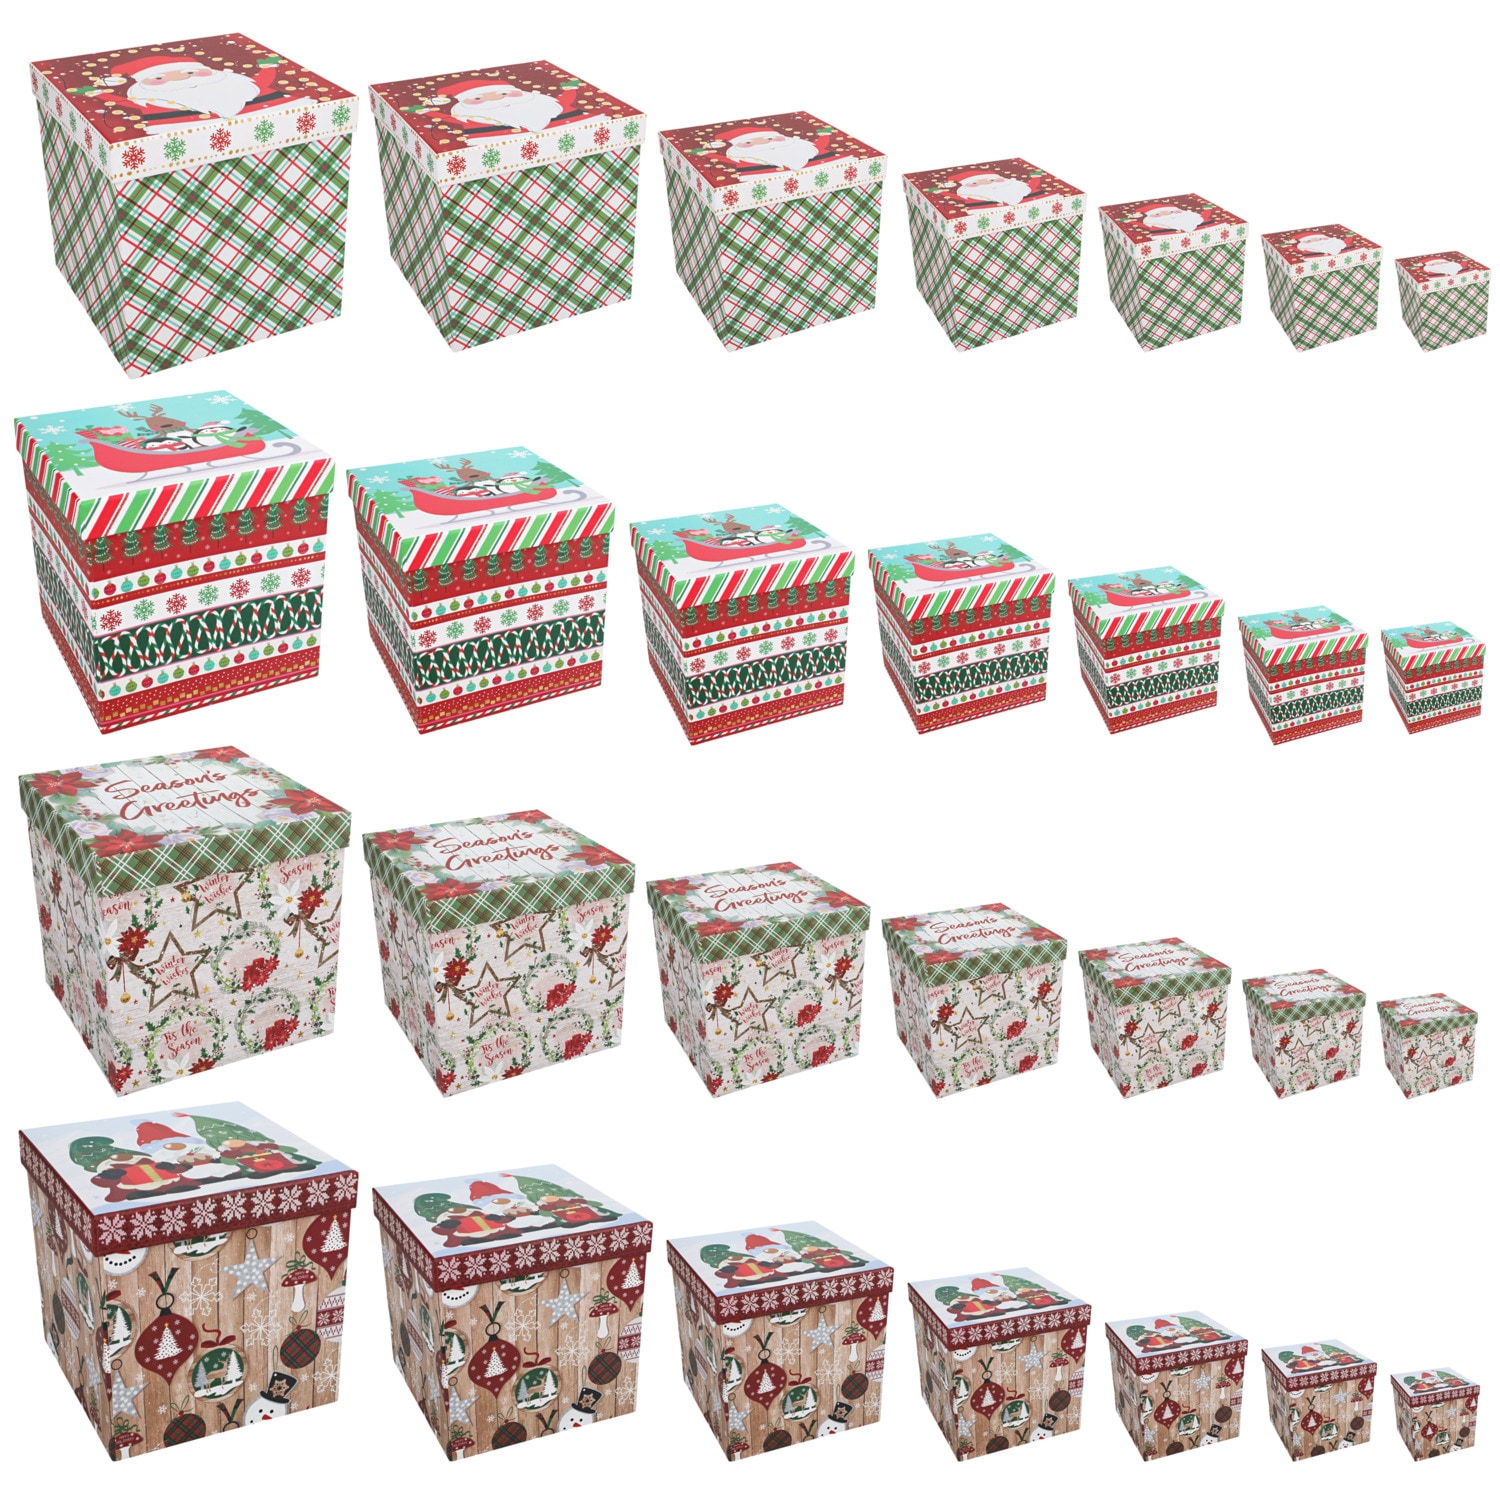 Christmas gift boxes from Dollar Tree